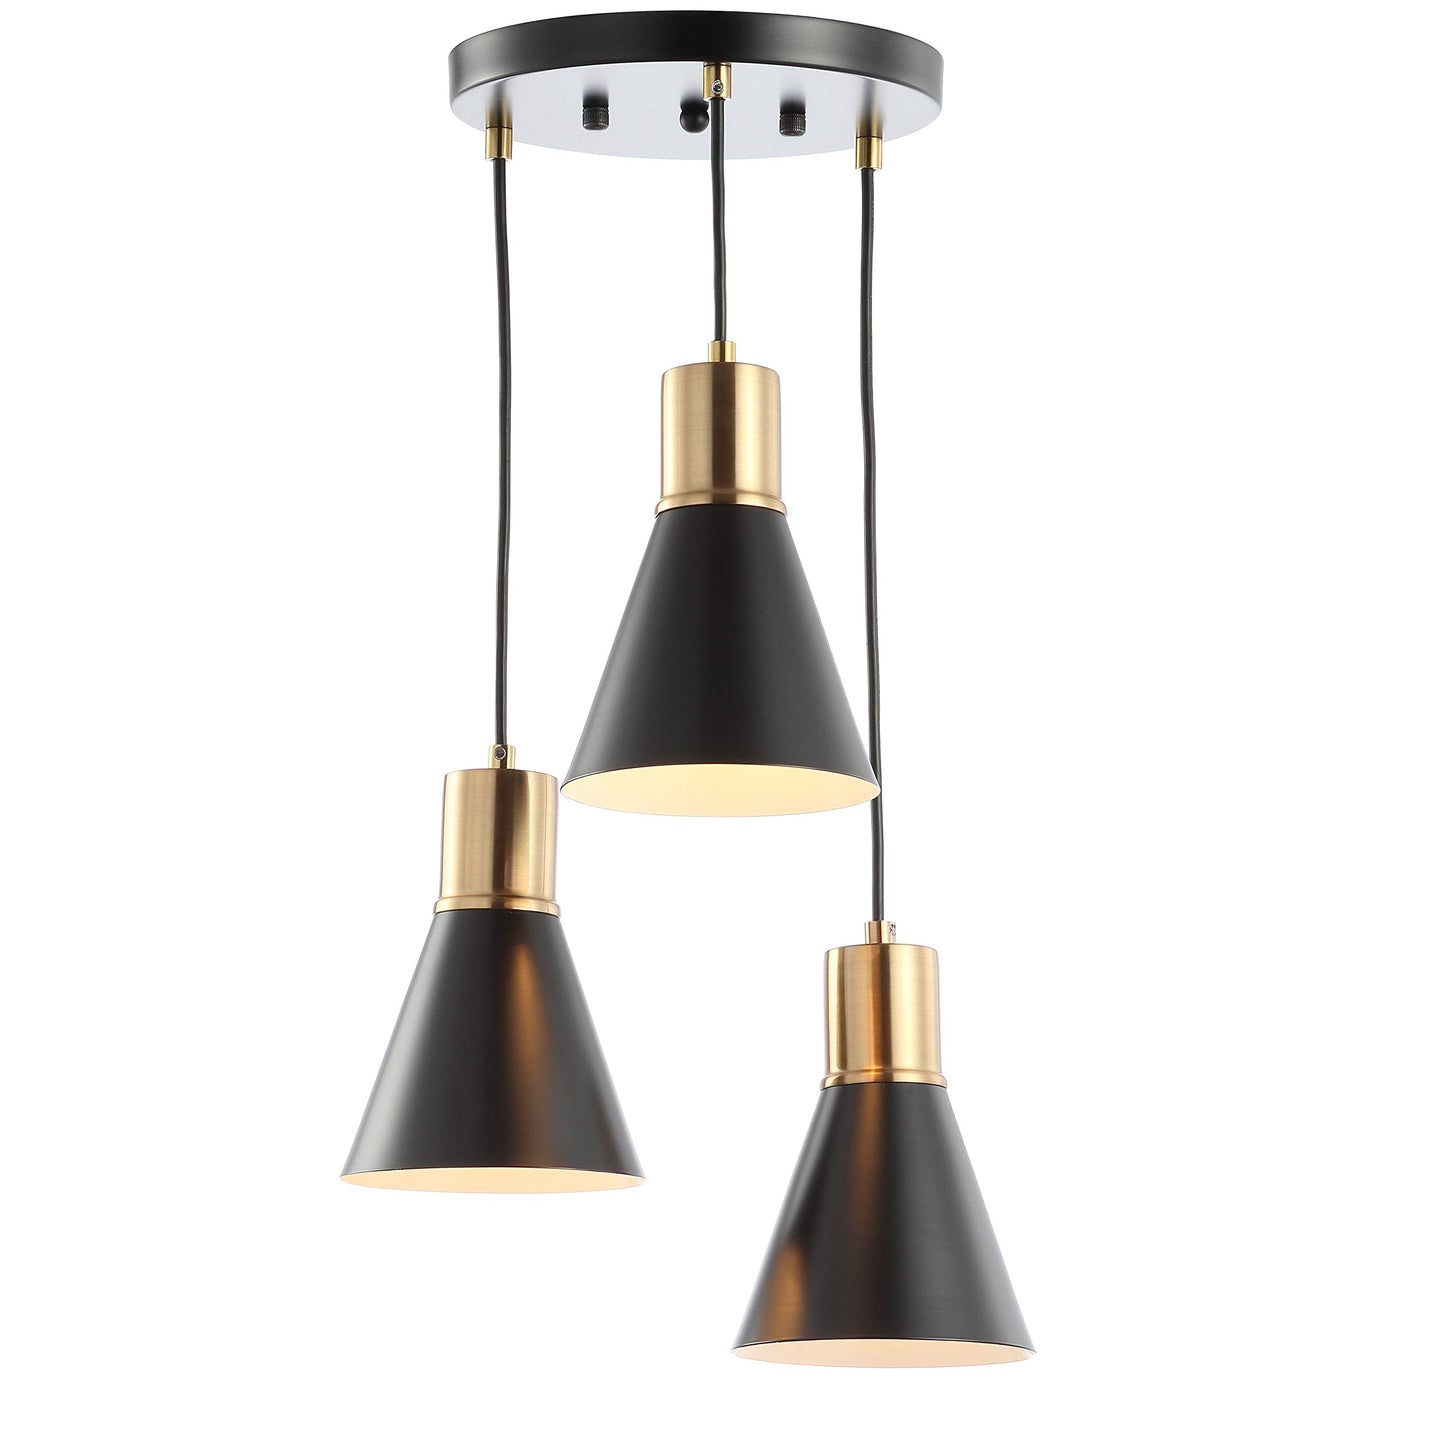 JONATHAN Y JYL6133A Apollo 15" 3-Light Metal Cluster LED Pendant, Contemporary, Modern, Office, Living Room, Family Room, Dining Room, Kitchen, Bedroom, Hallway, Foyer, Black/Brass Gold - Like New